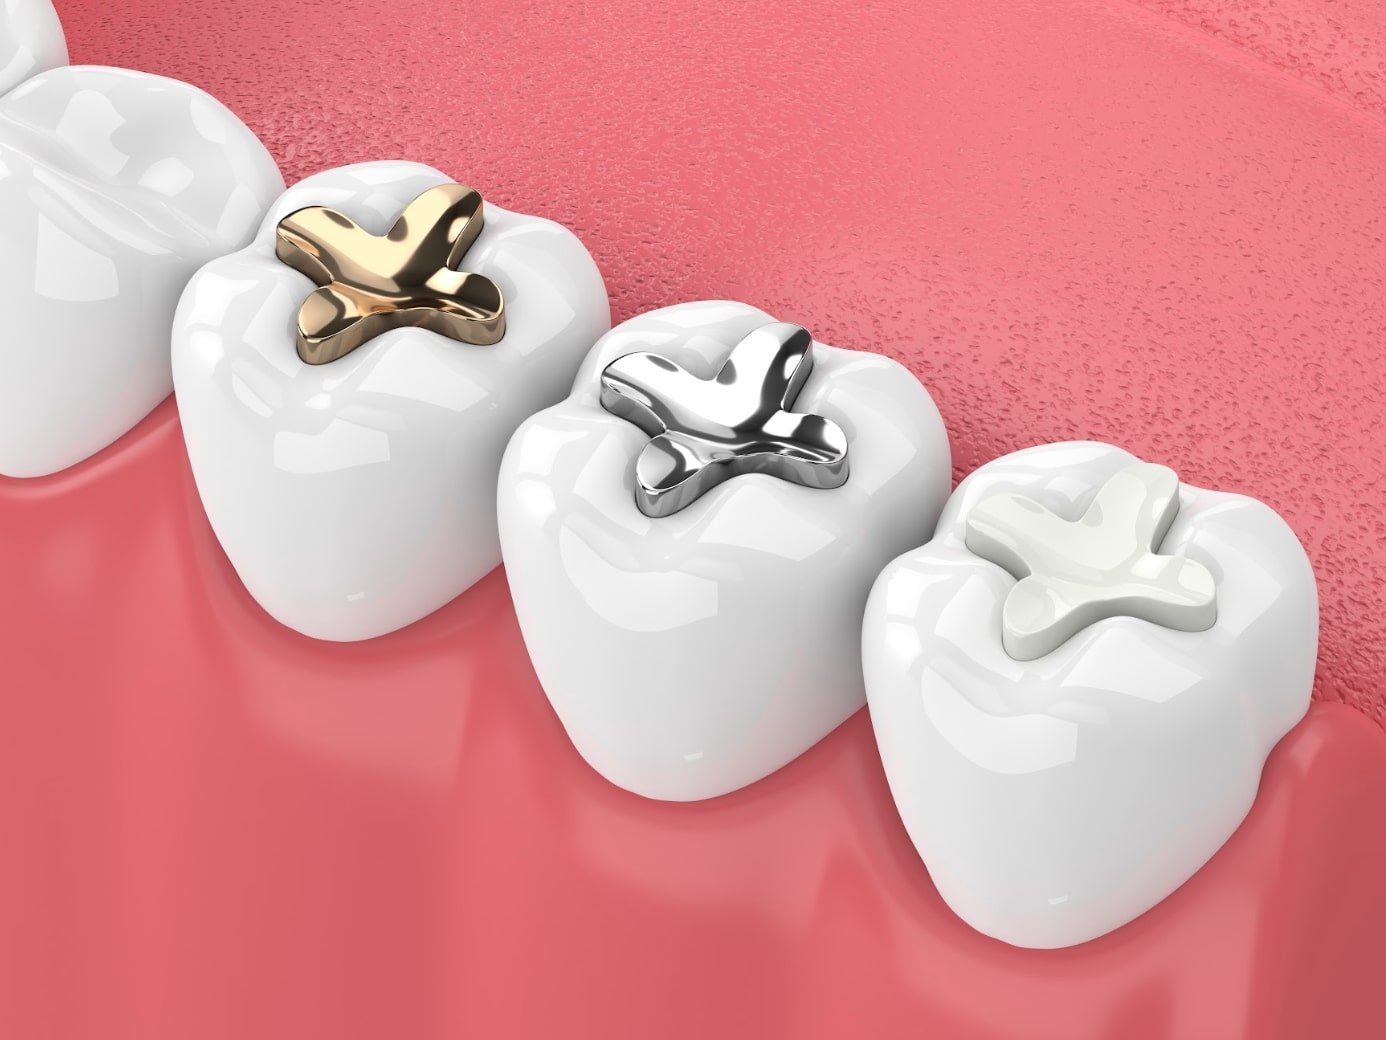 Image with three different fillings in teeth - Gold, Silver, and White